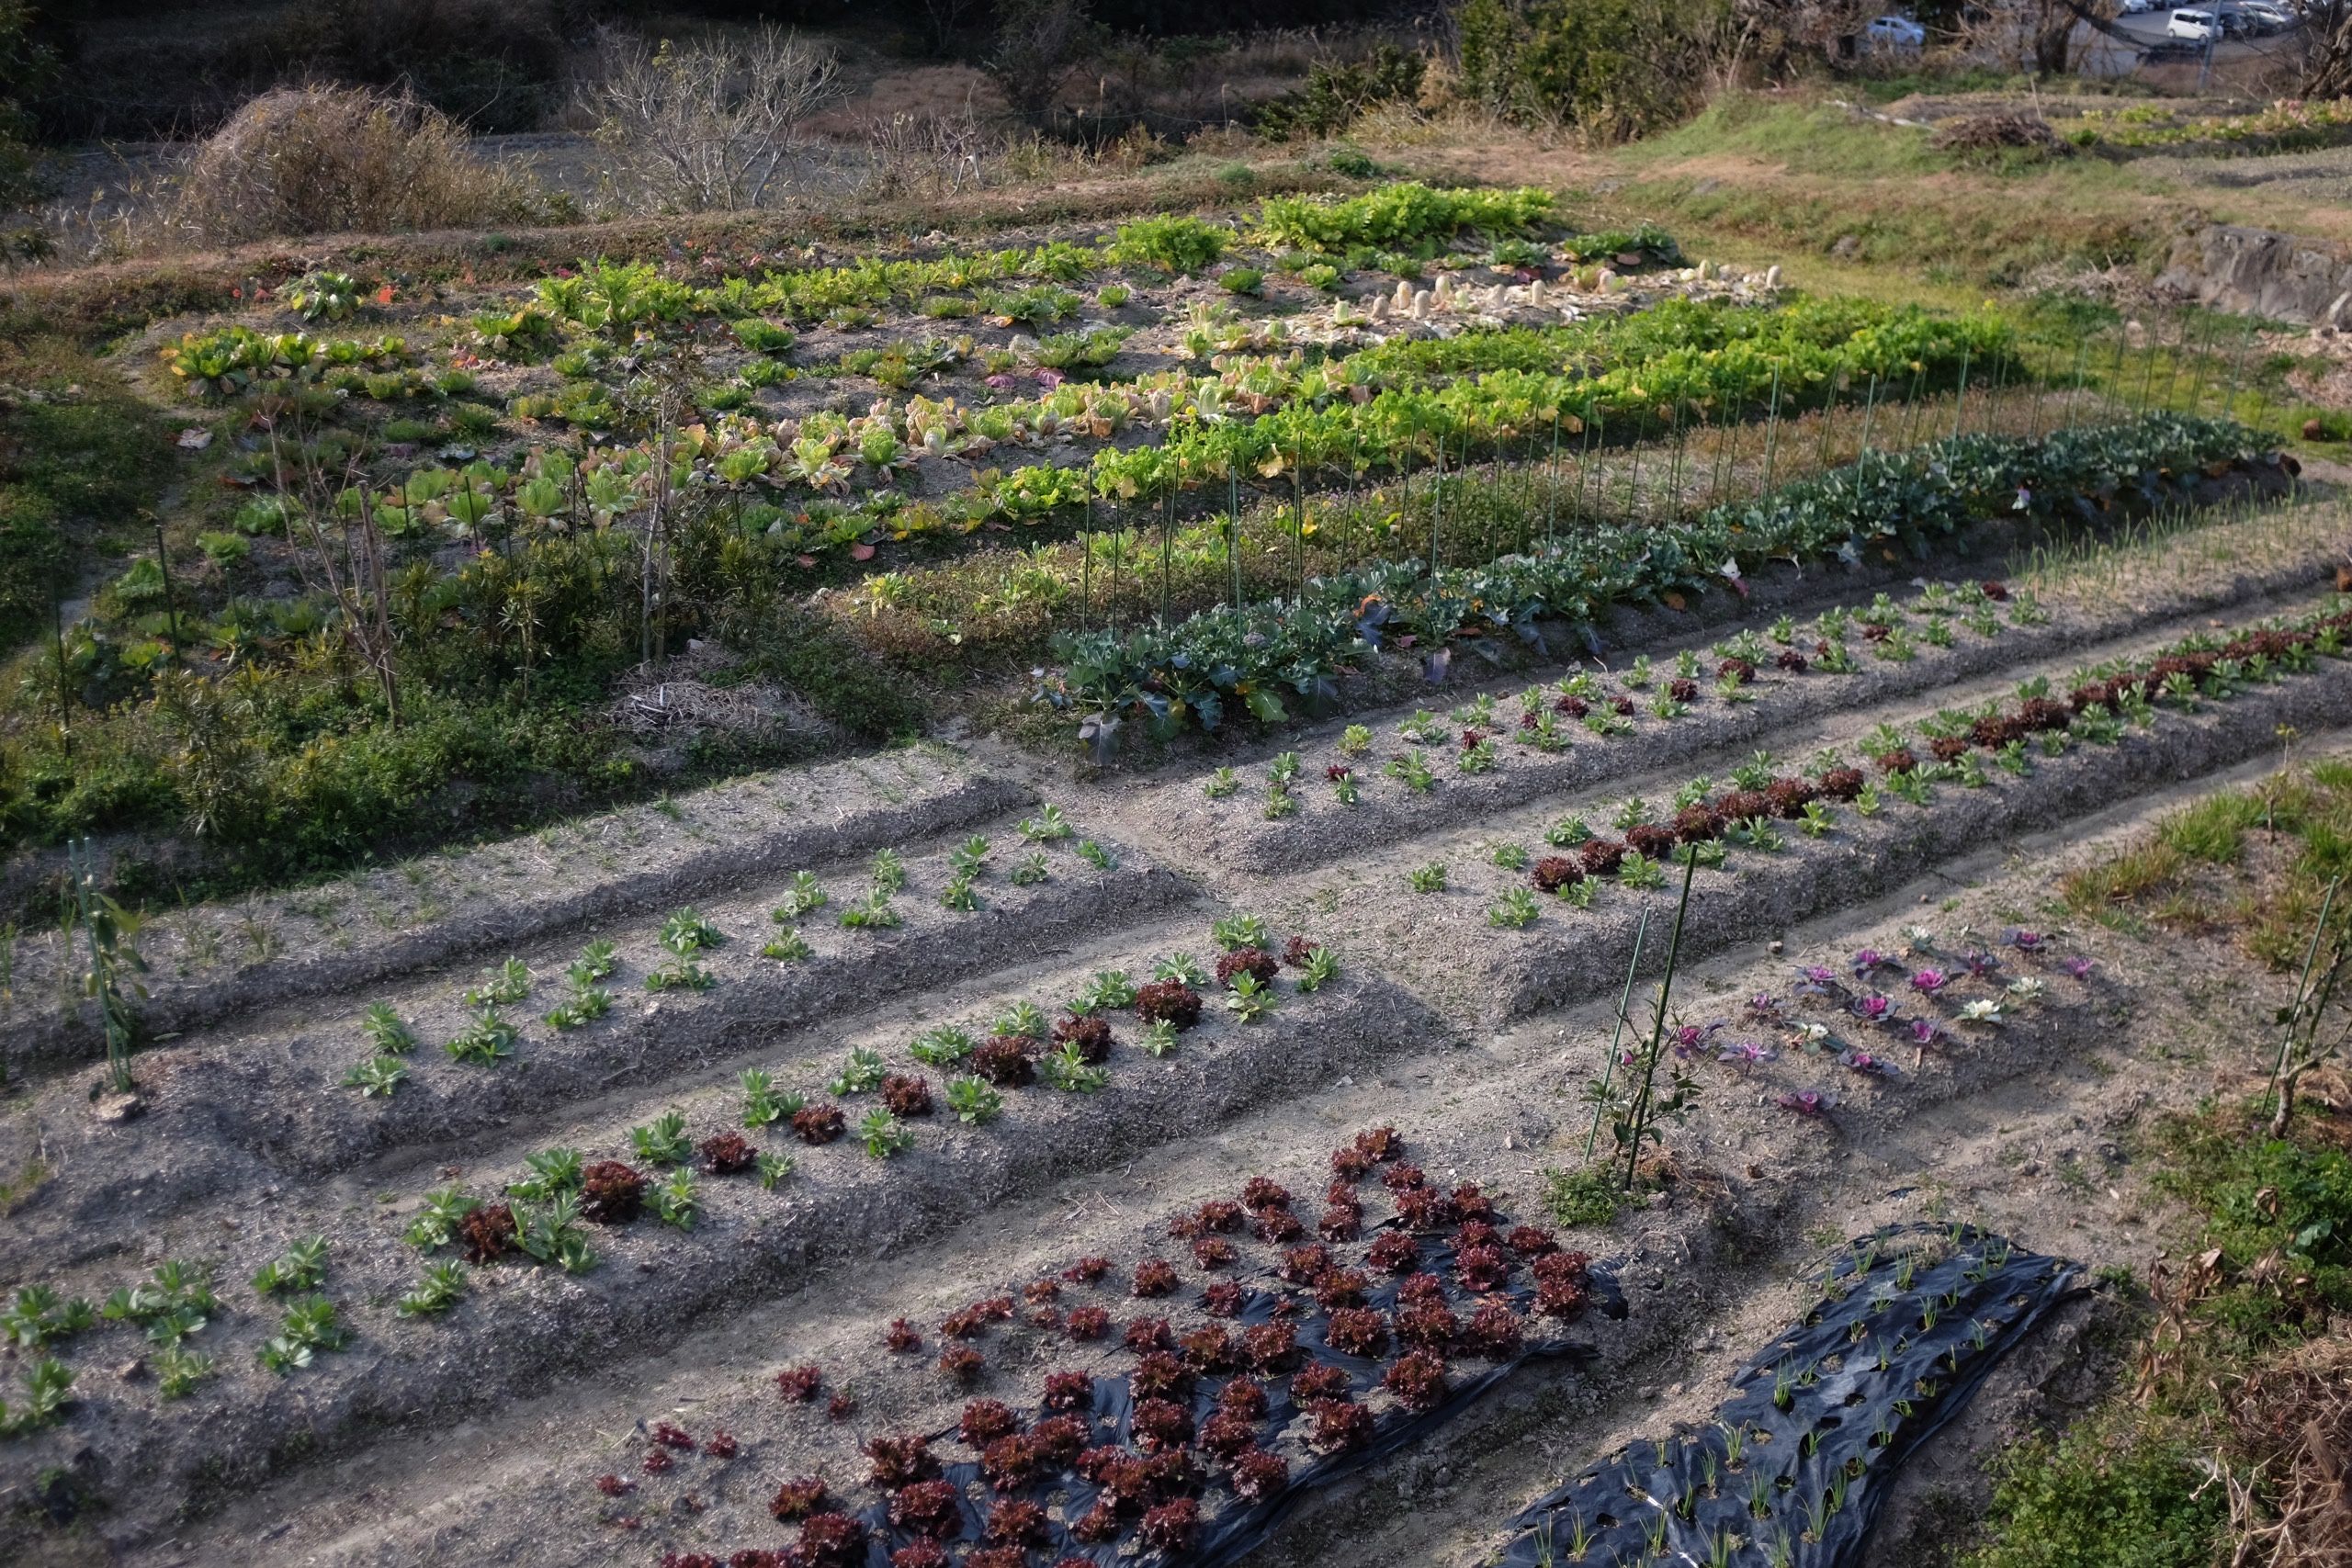 Very organized rows of vegetables in a garden.